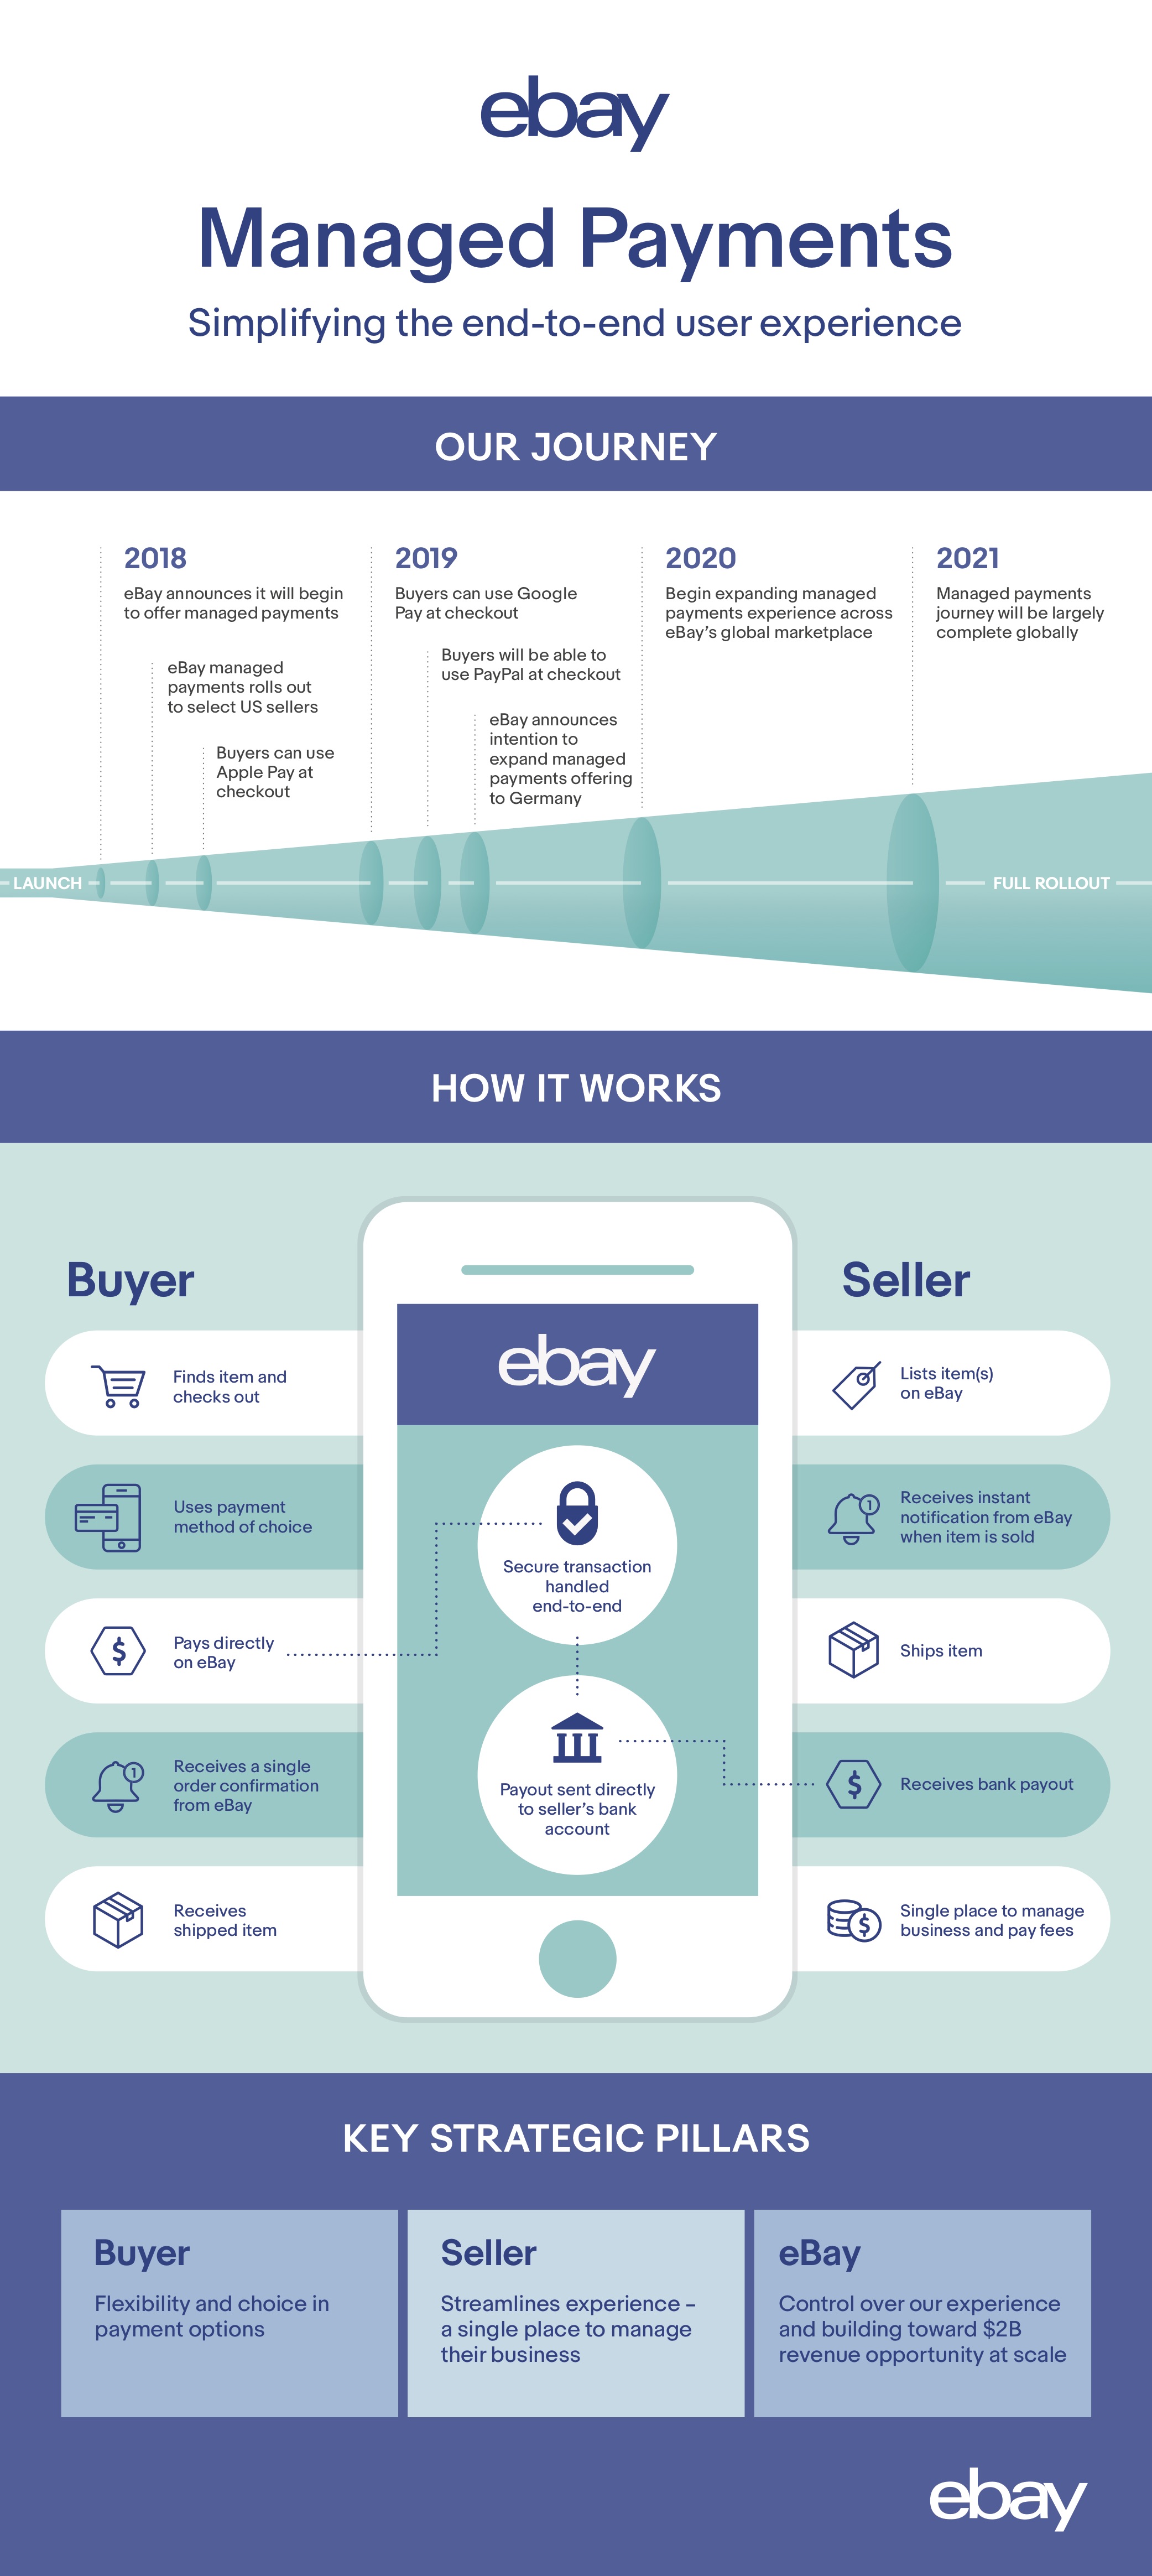 What does it mean for eBay to manage payments